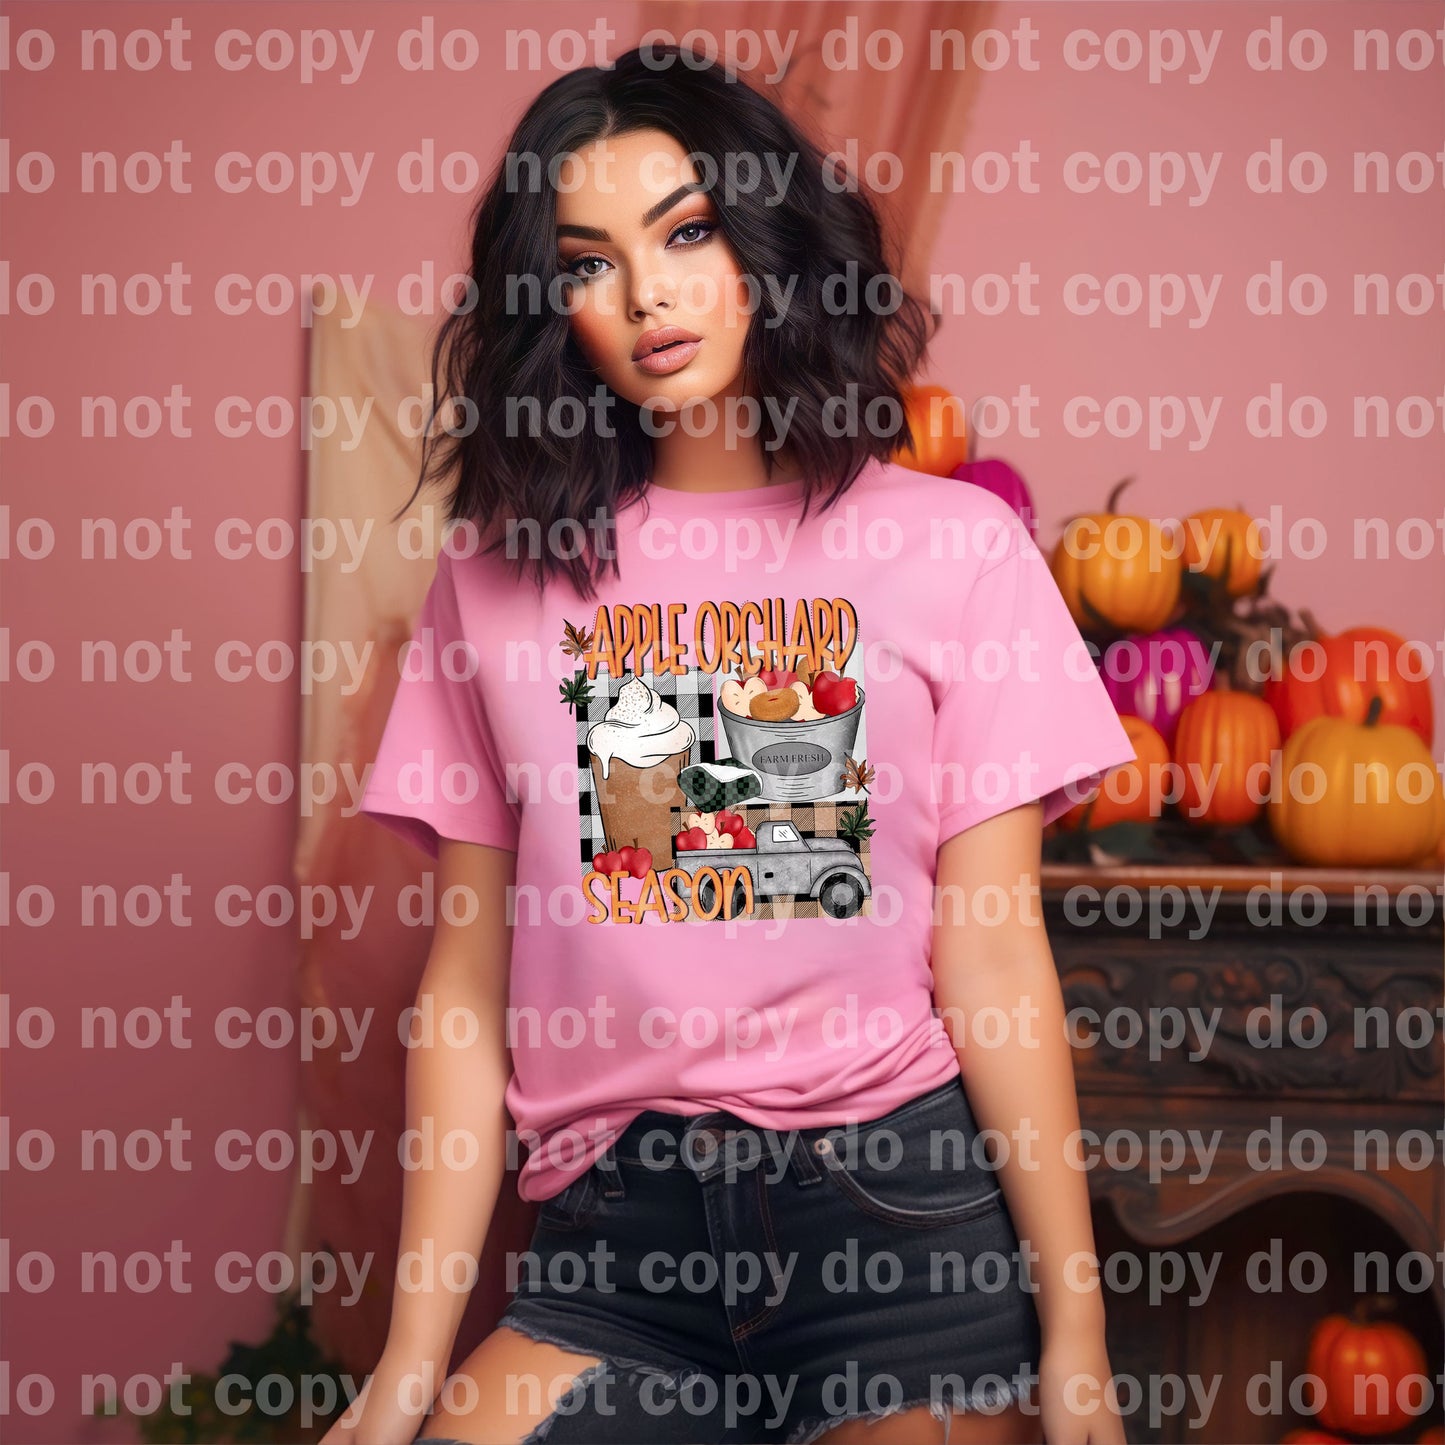 Apple Orchard Season with Optional Sleeve Design Dream Print or Sublimation Print